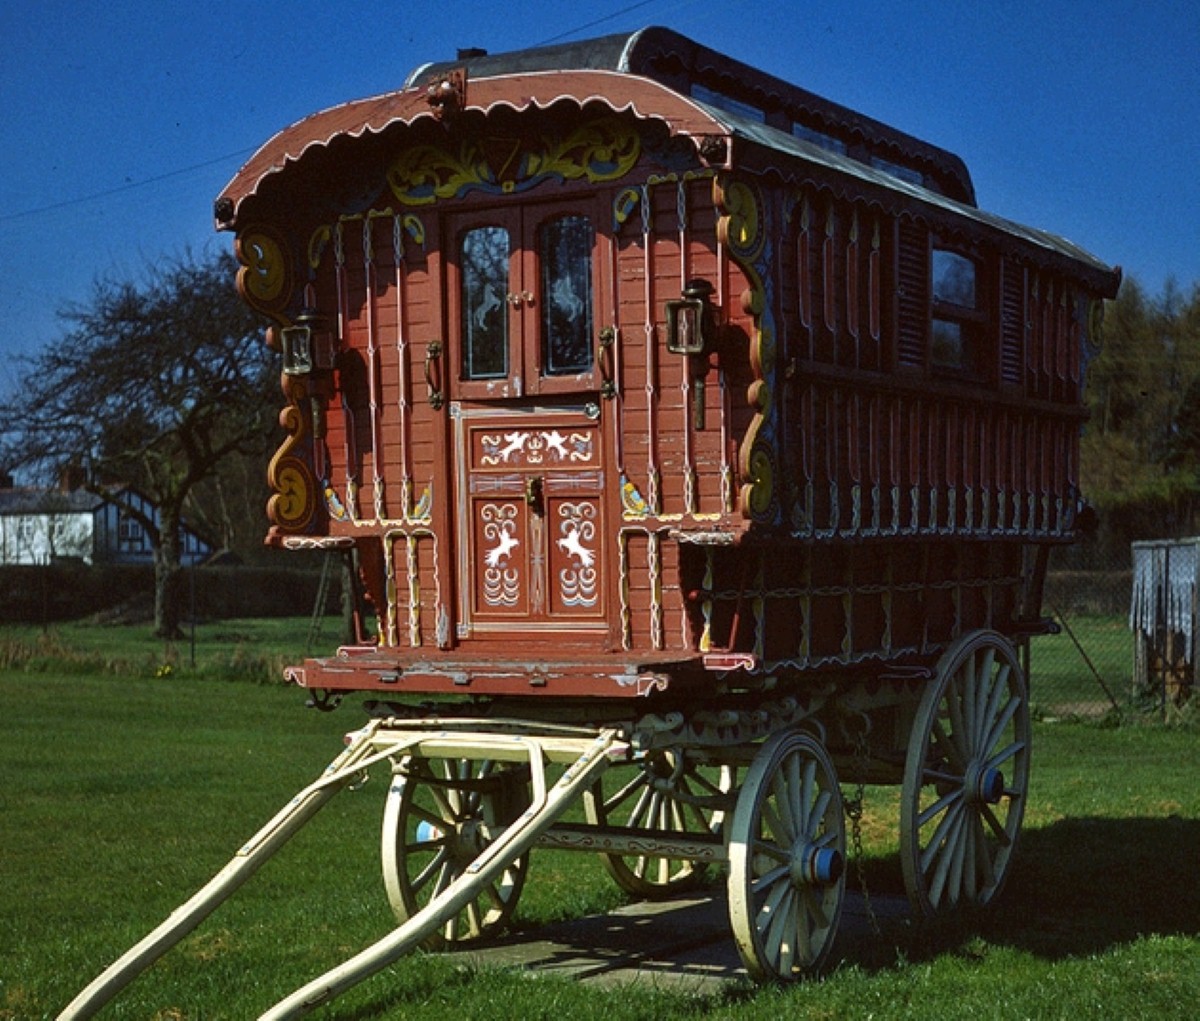 The entrepreneurial caravan maker provides gypsy caravans, like the one pictured, for weddings